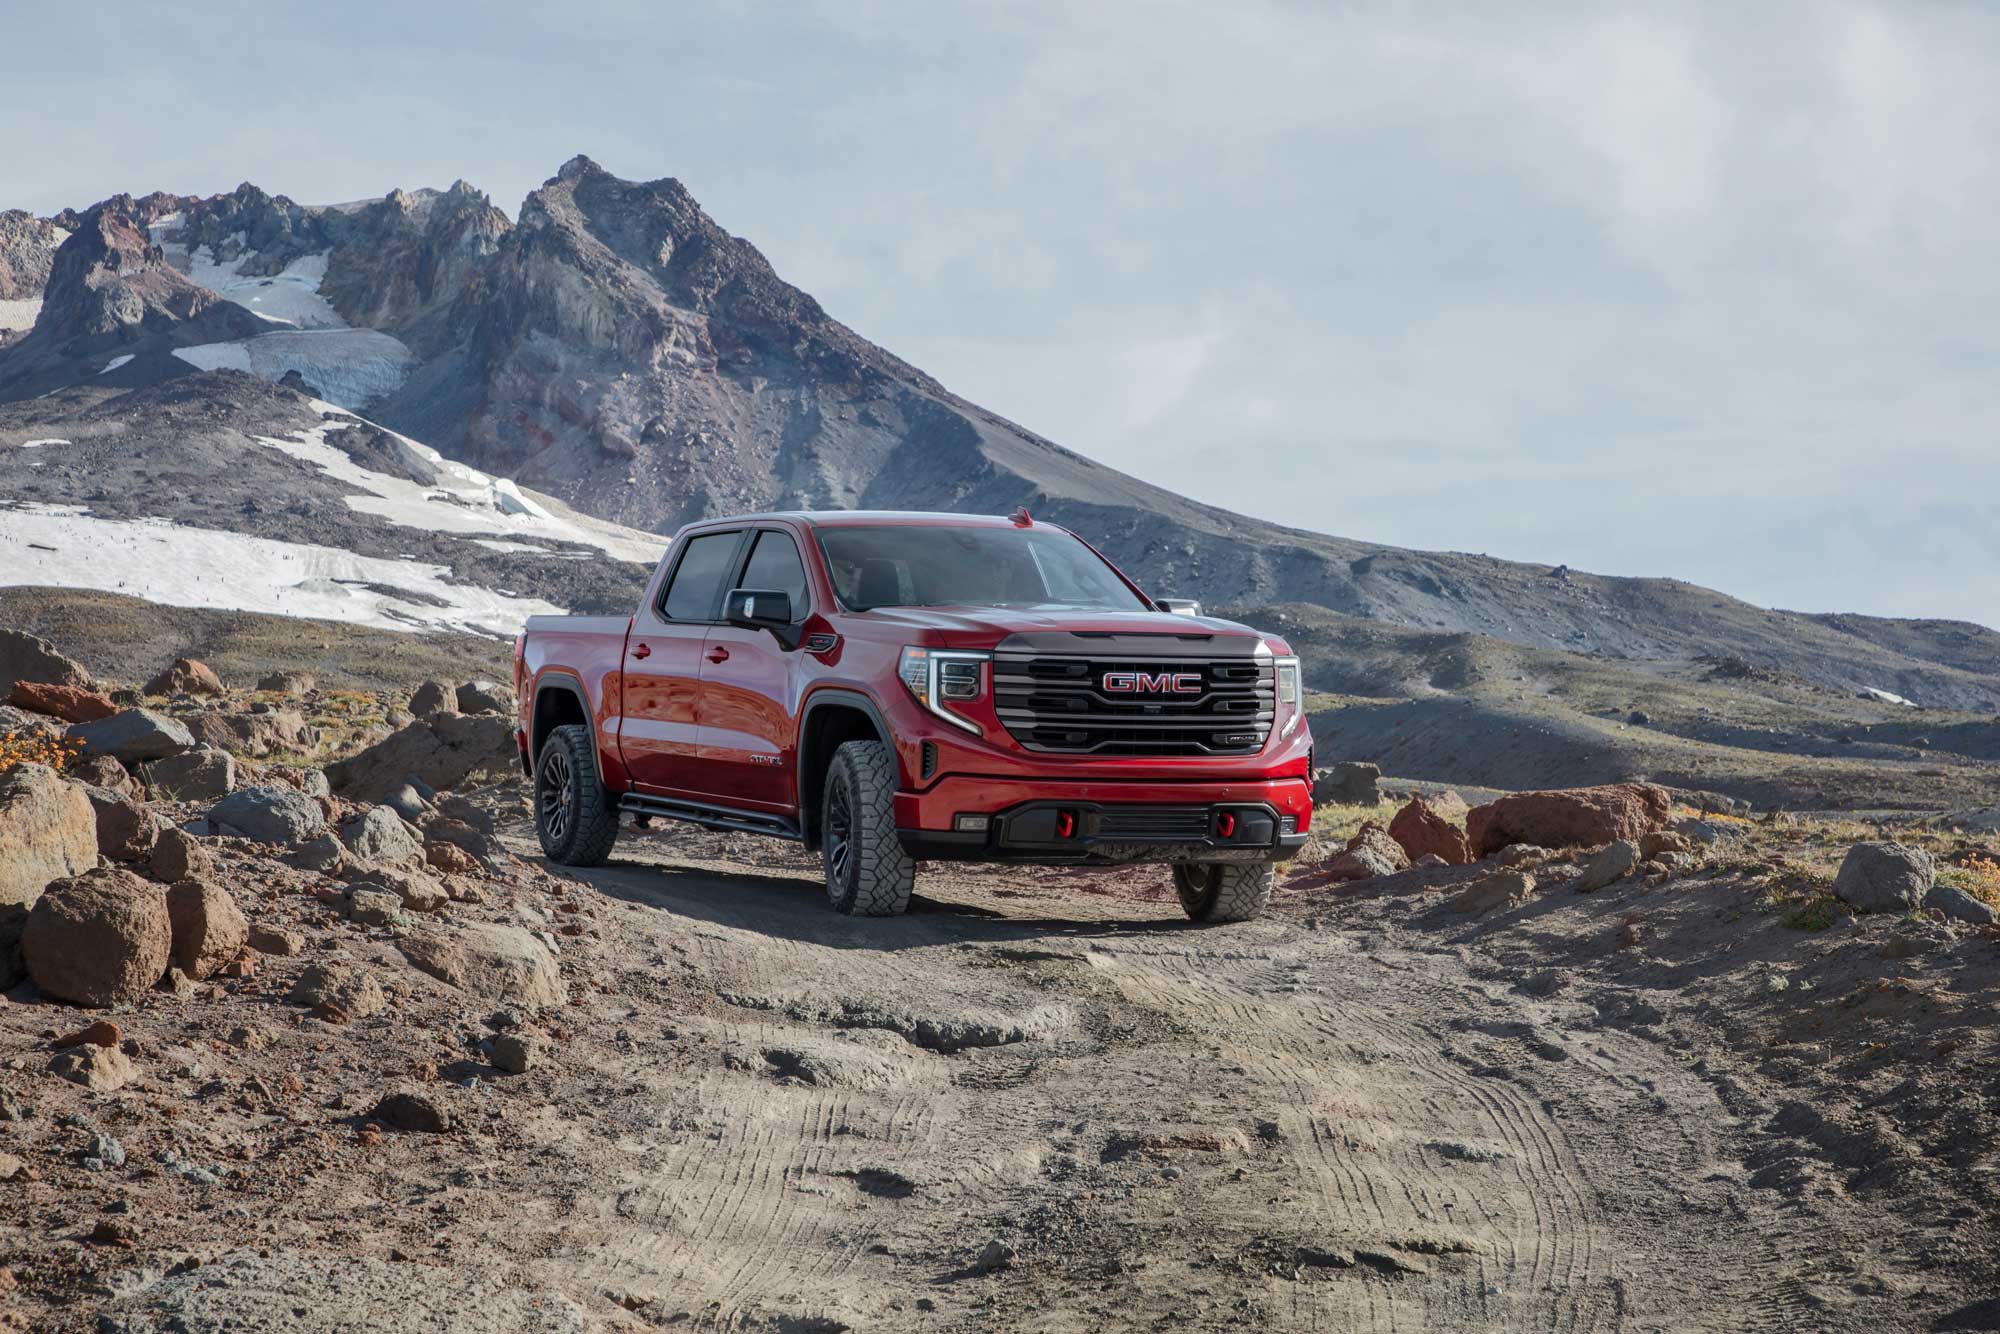 GMC Sierra 1500 in red parked on dirt road with snowy mountain in the background